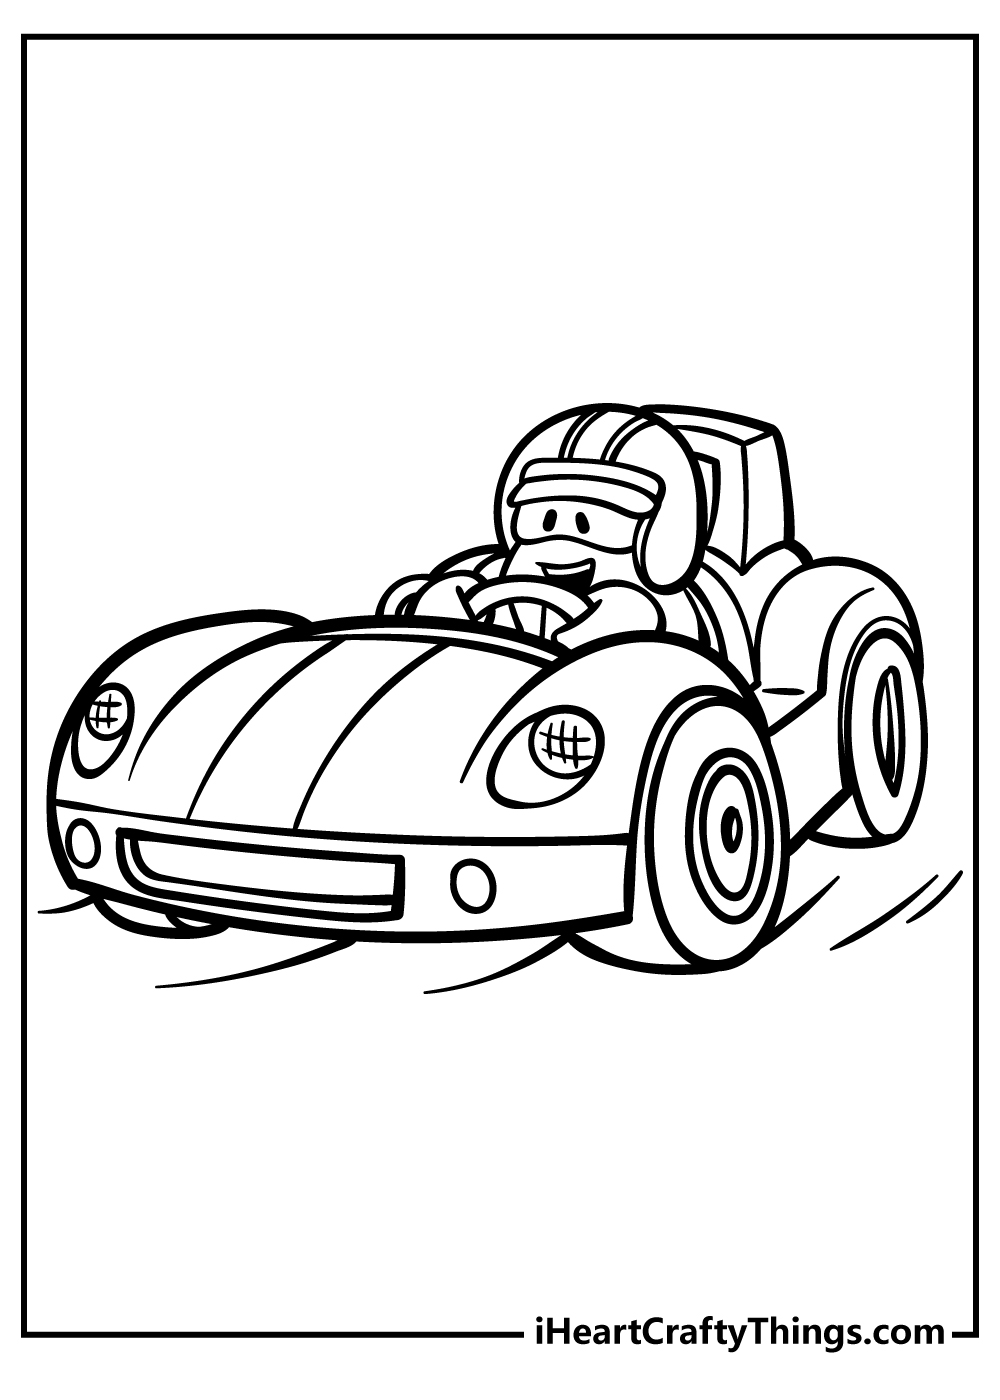 Race Car Coloring Sheet for children free download